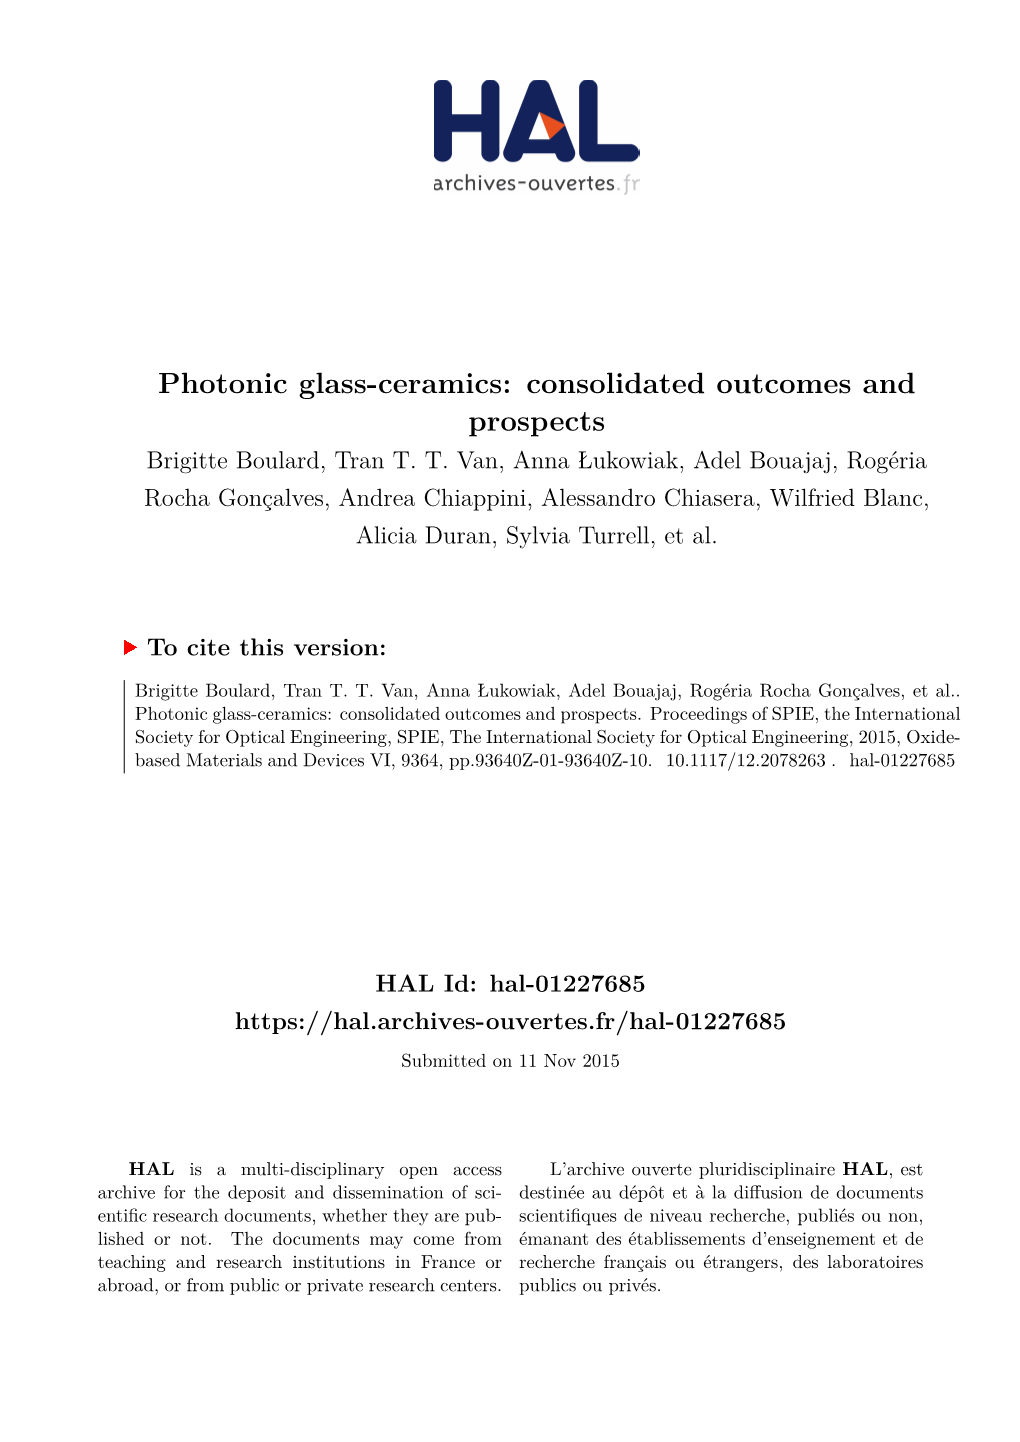 Photonic Glass-Ceramics: Consolidated Outcomes and Prospects Brigitte Boulard, Tran T